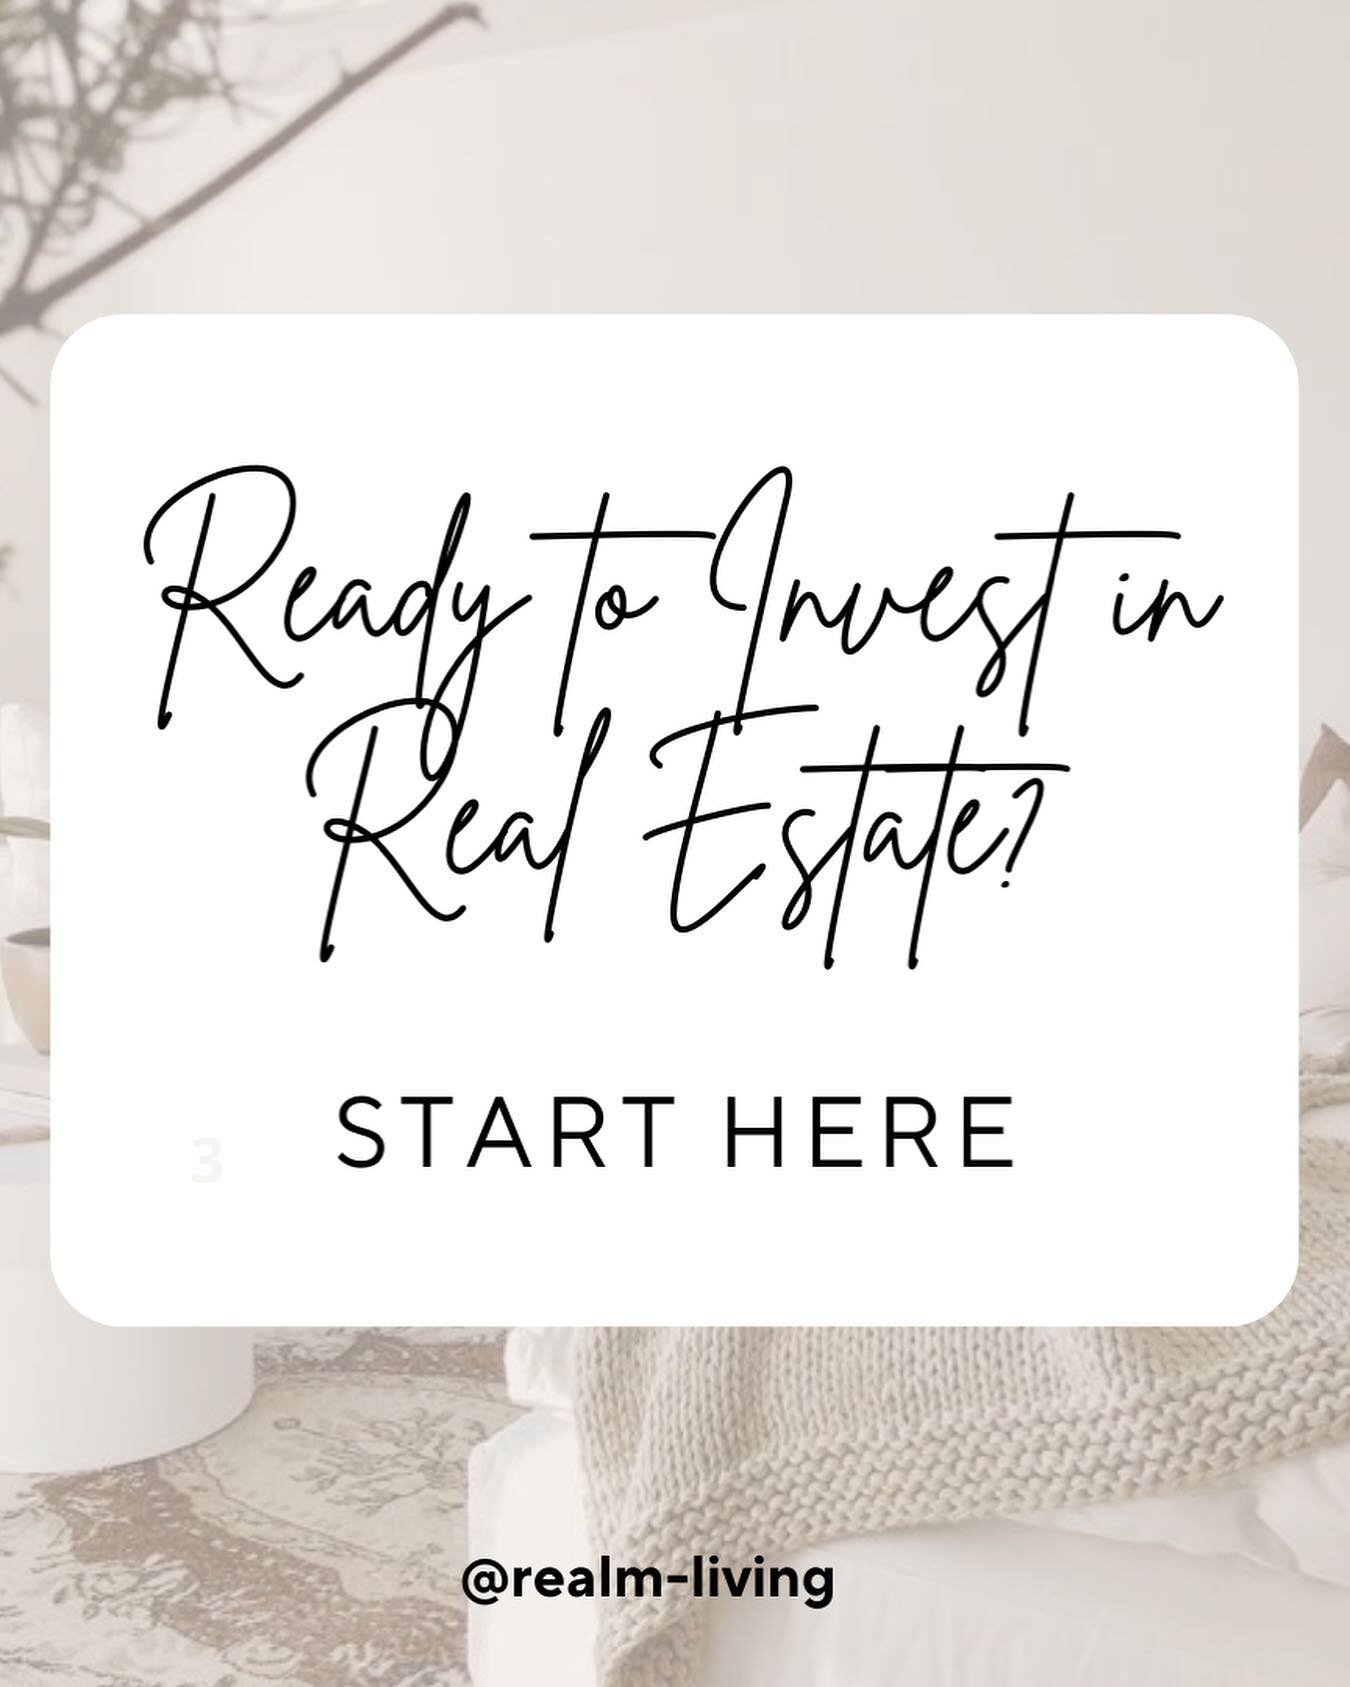 Ready to invest in real estate? Start here! 

#realestate #realtor #realestateinvesting #realestateagent #wealthbuilding101 #wealthbuilding #investing #investing101 #imvestingtips #tips #tipsandtricks